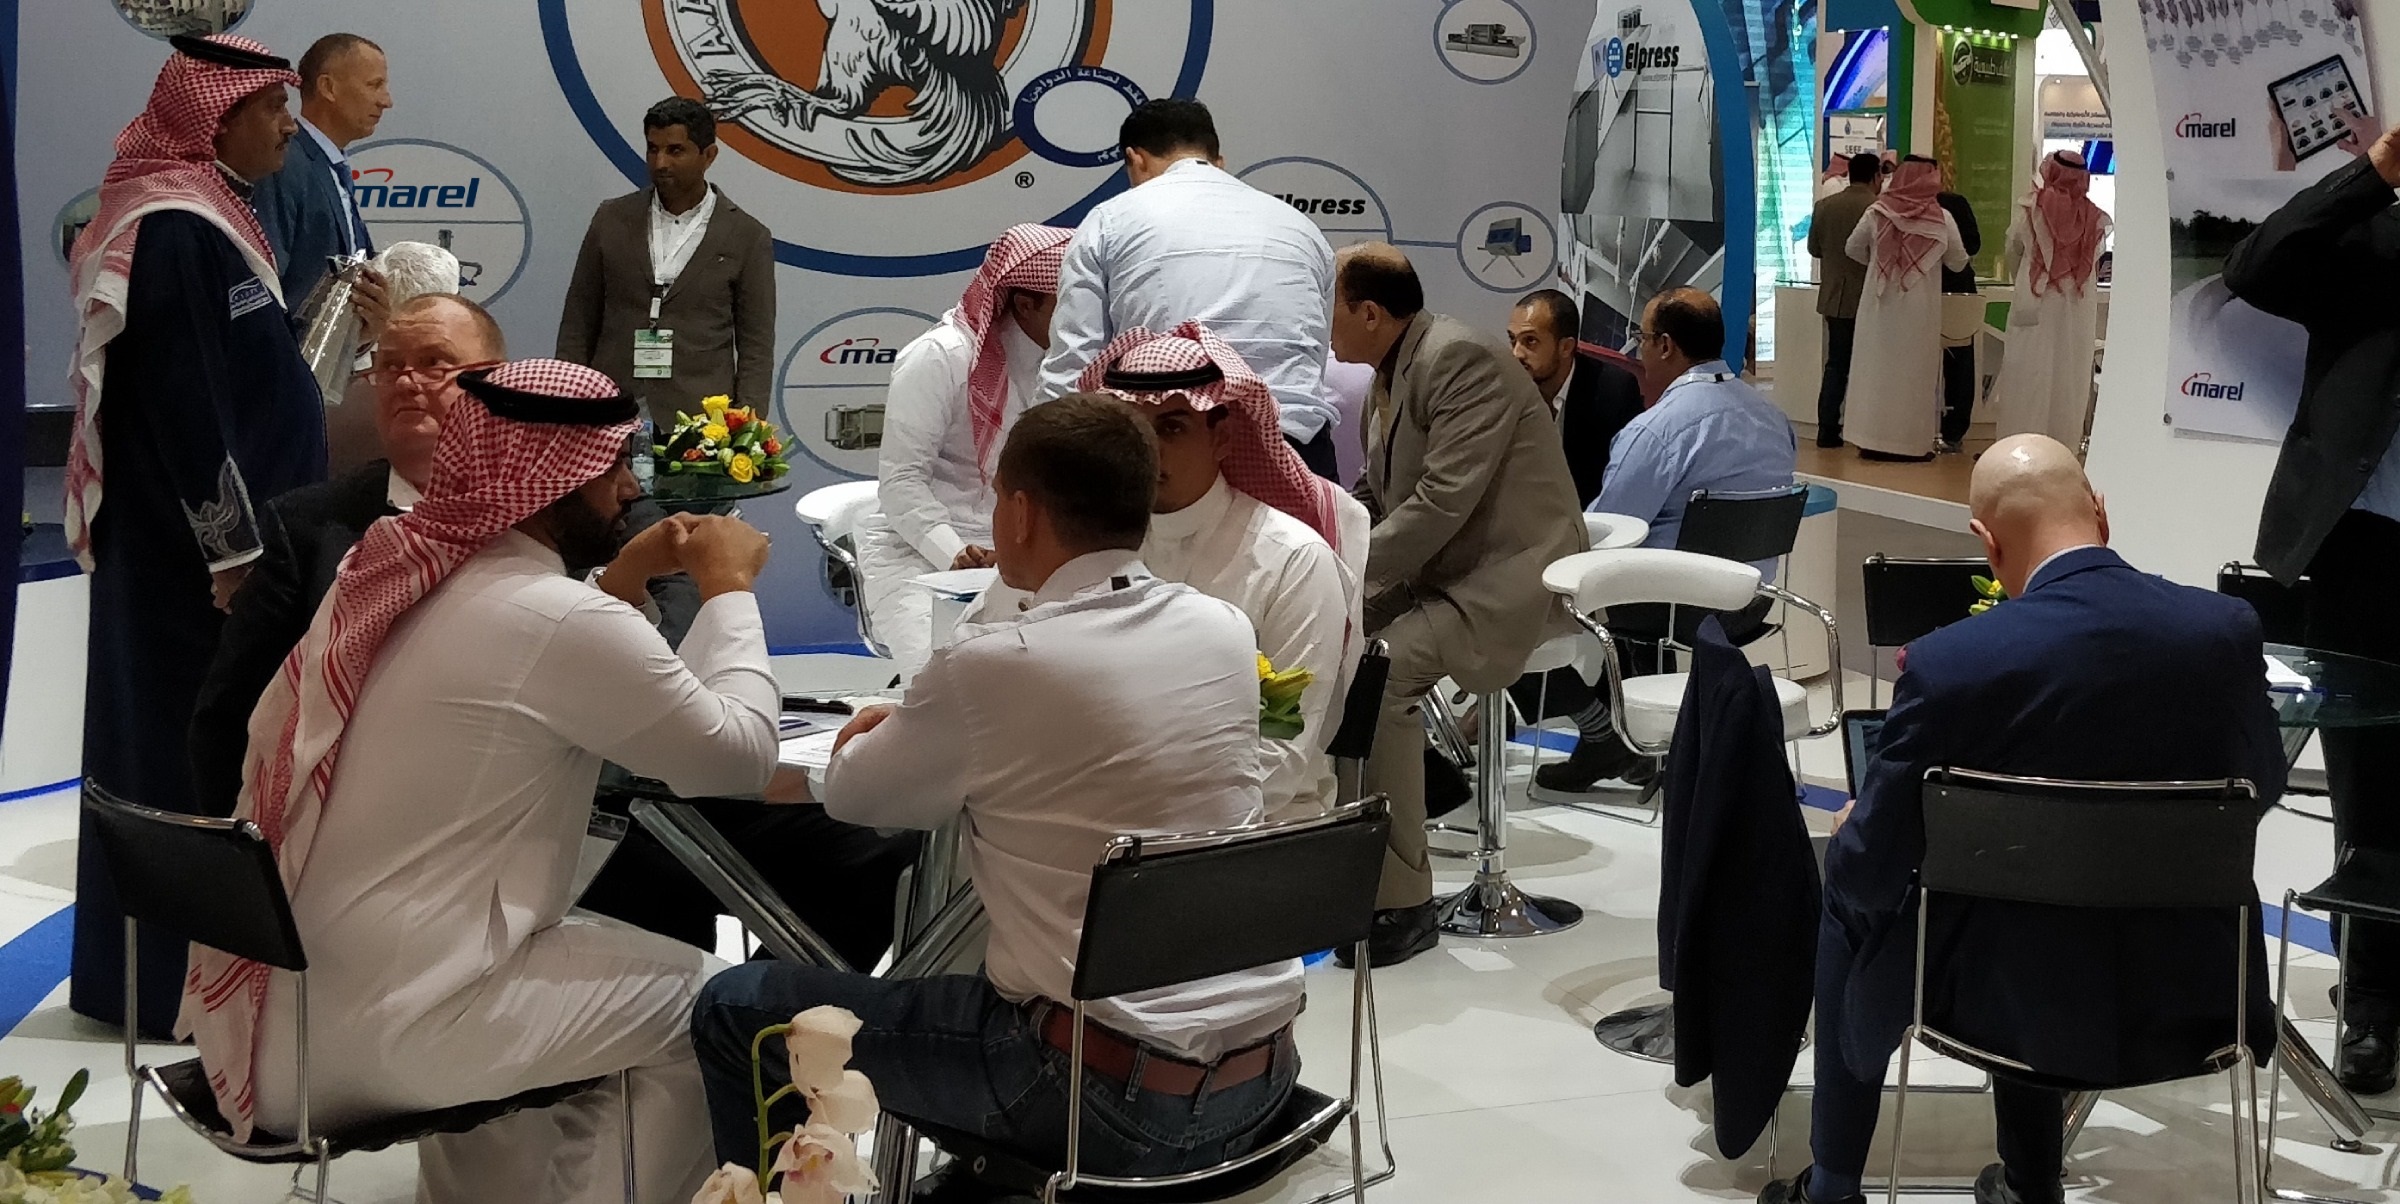 Middle East Poultry Expo 2023